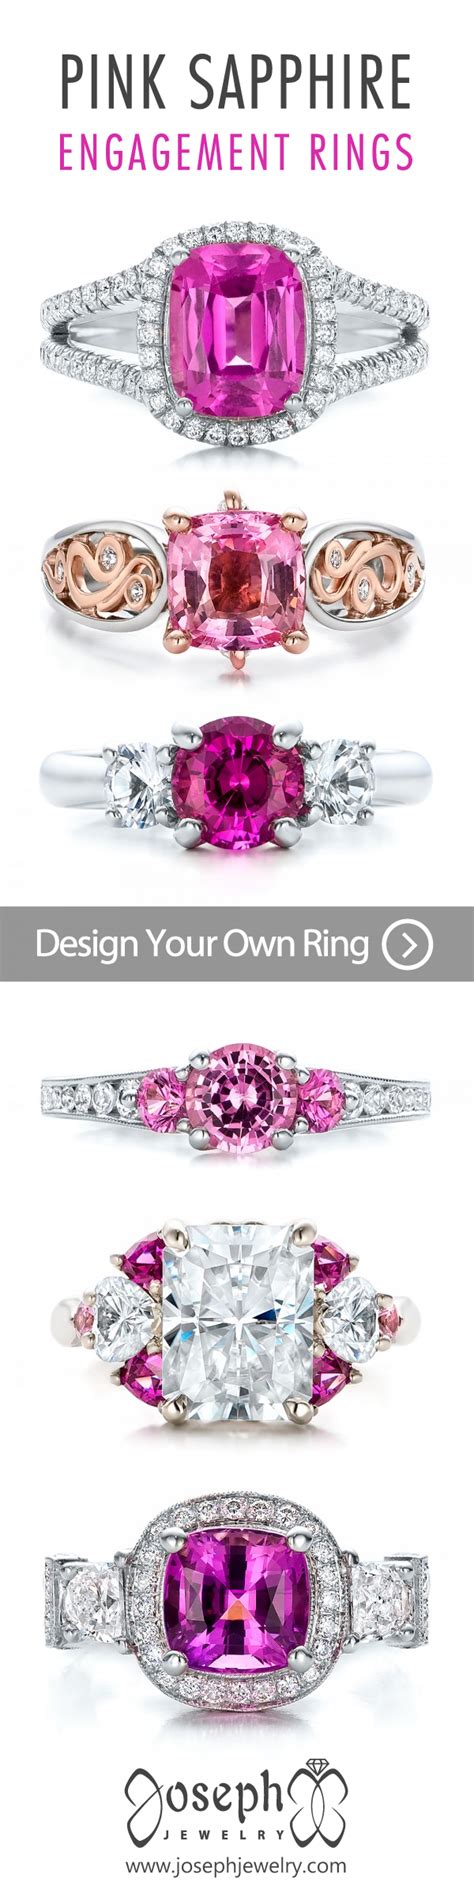 Engagement rings shop all engagement rings shop all. Design your own pink sapphire engagement ring! Sapphires are one of the bes… | Pink sapphire ...